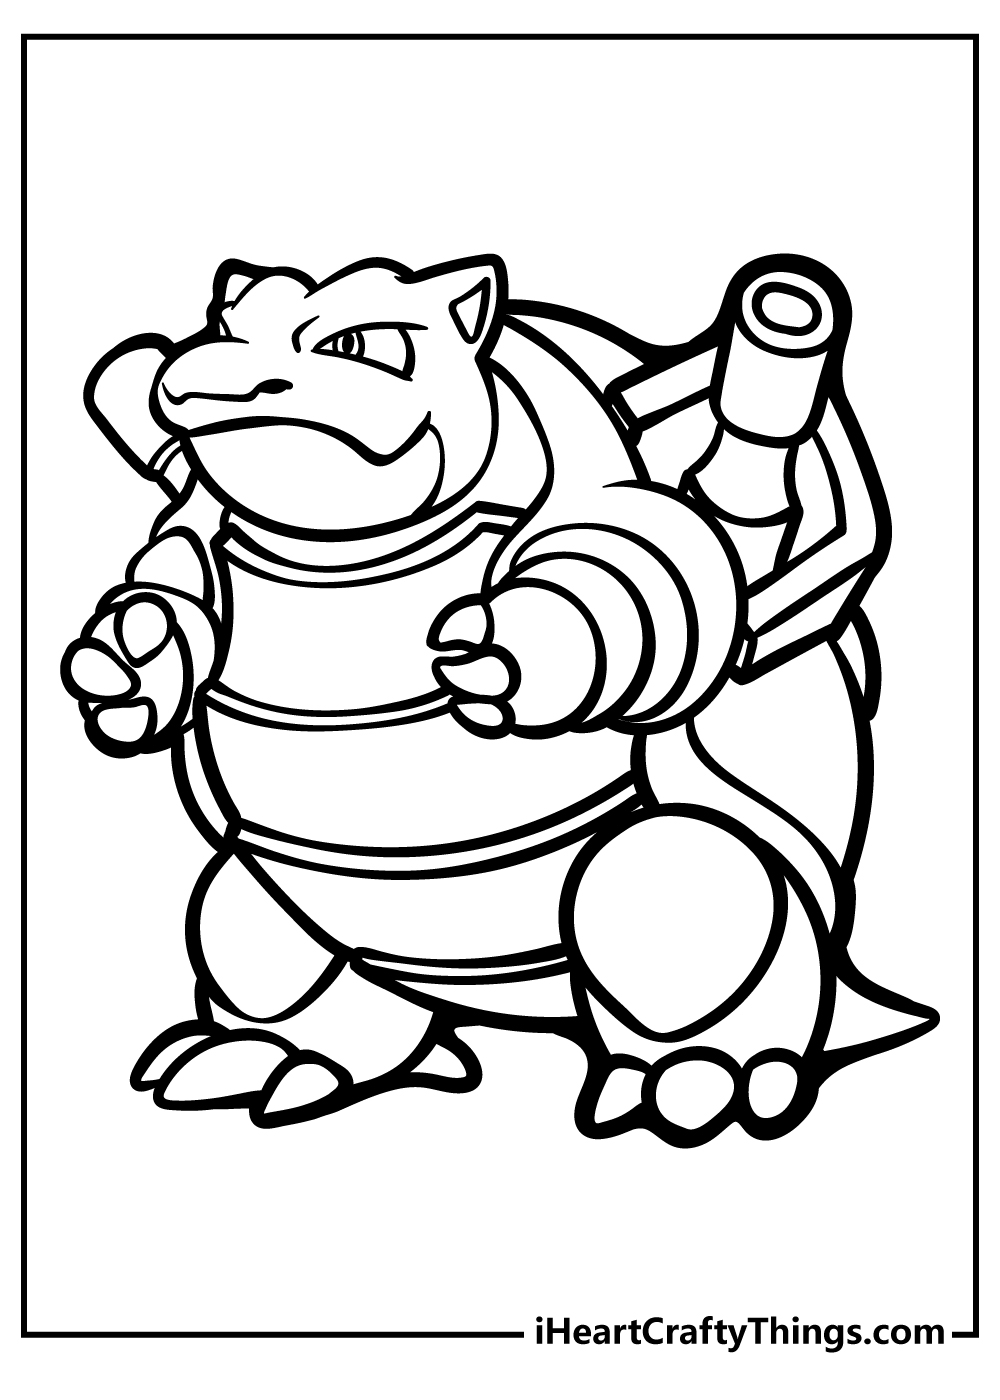 Mega Pokemon Coloring Pages for adults free printable